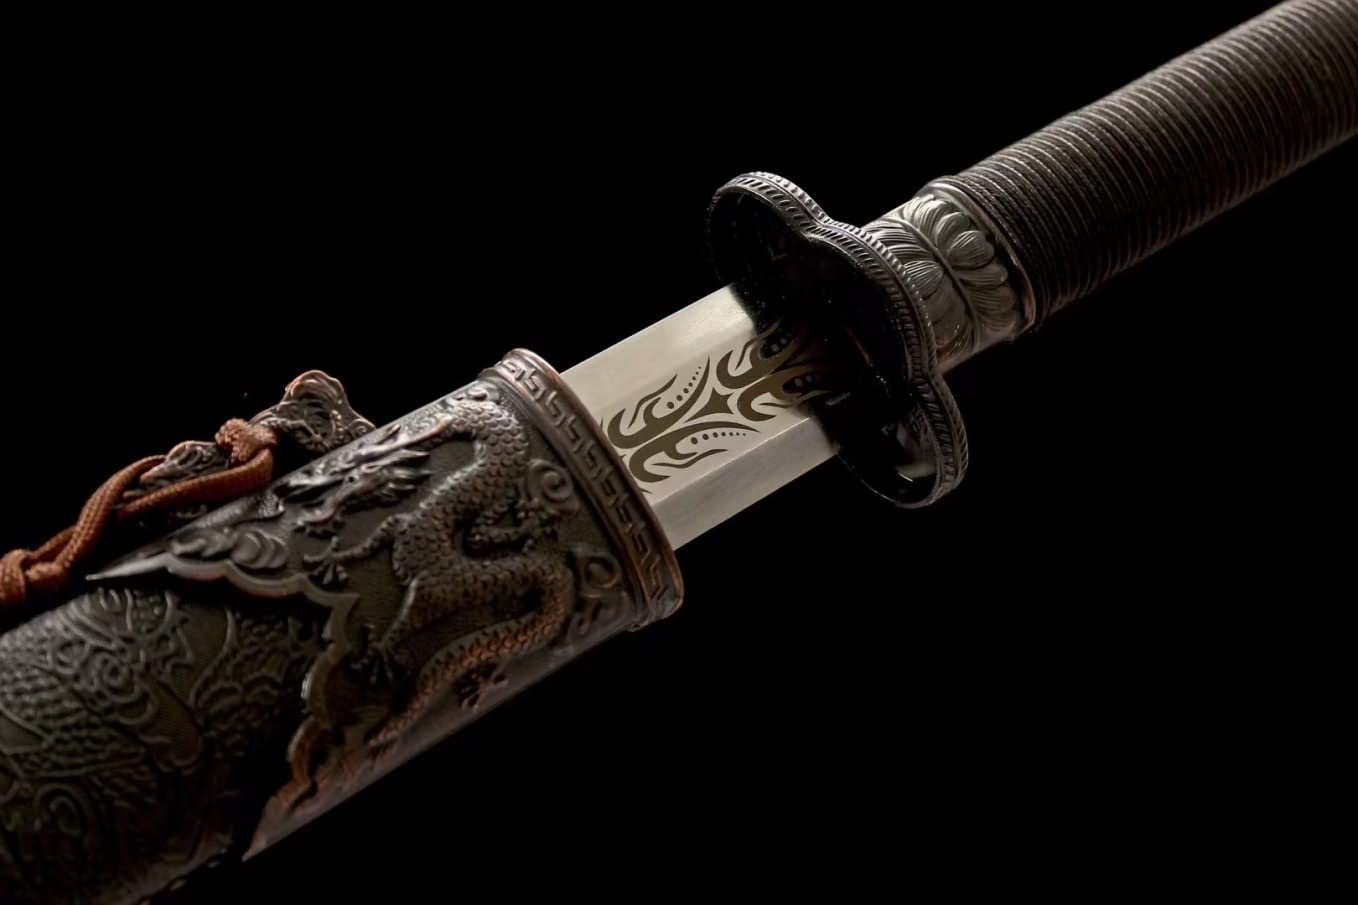 LoongSWORD,War Sword Real jian,Battle Ready,Hand Forged Etched Blades